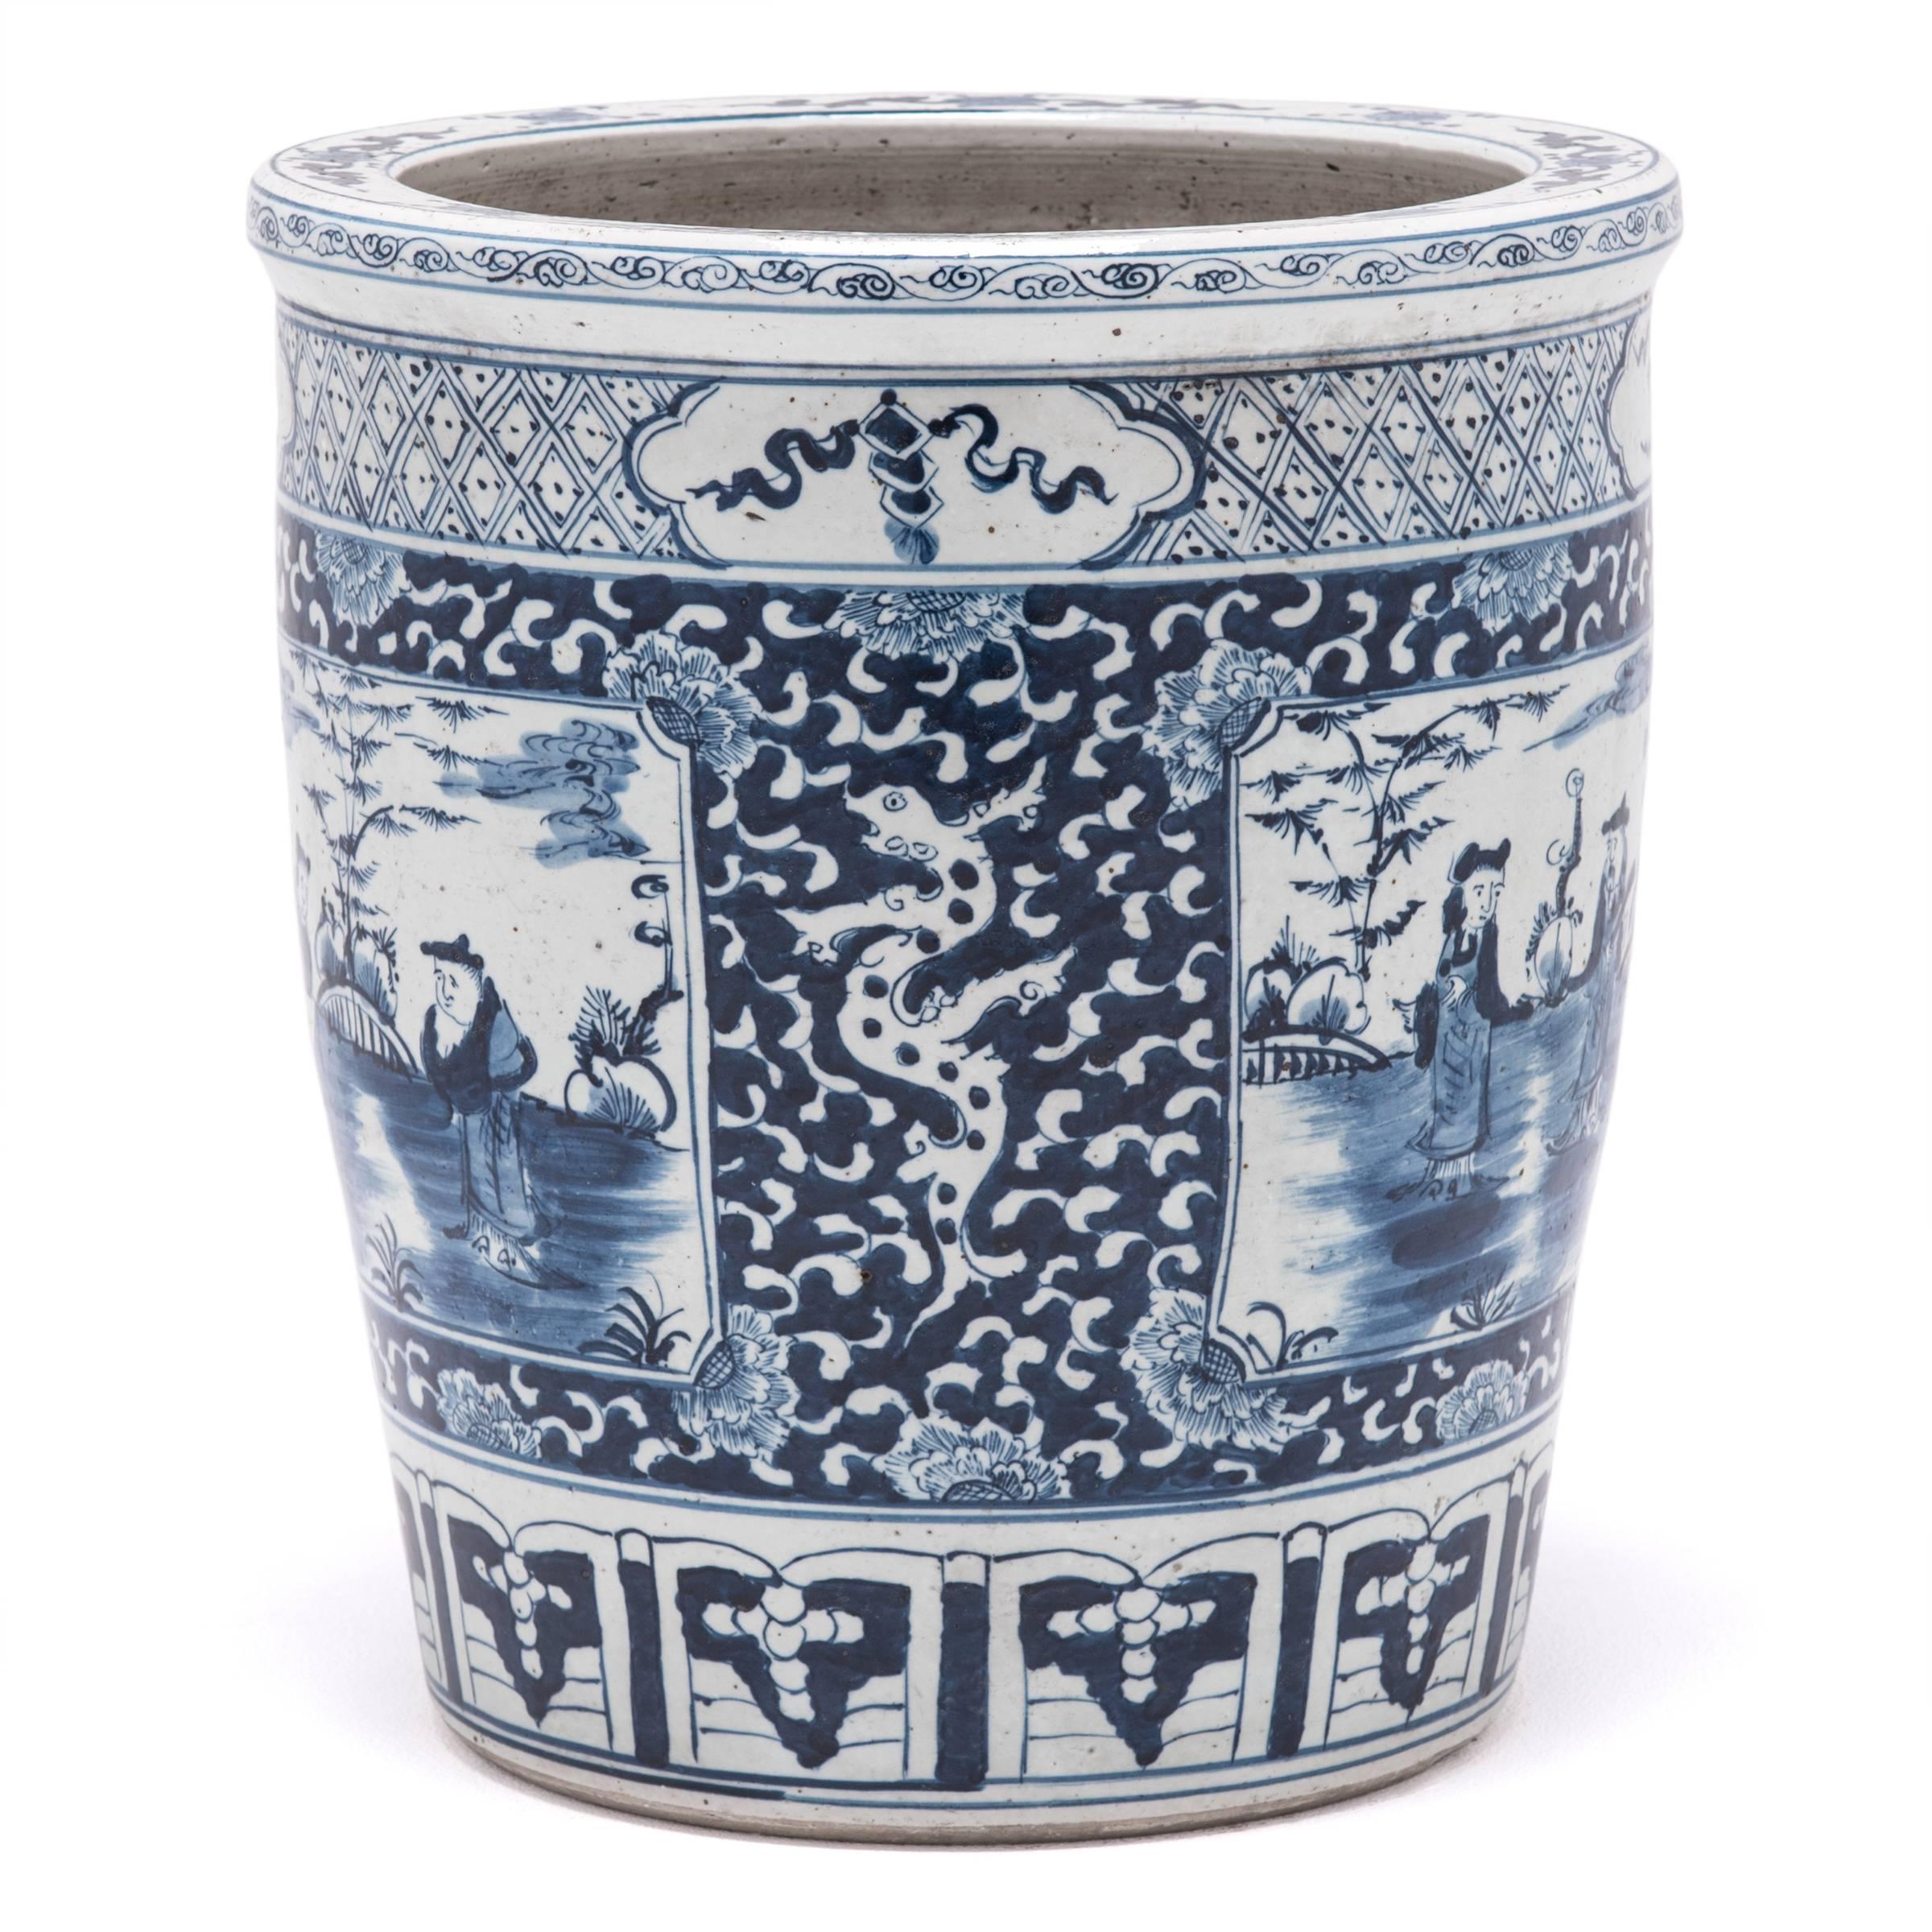 Made in 2015, this contemporary vase from Zhejiang province turns a fond eye to China’s esteemed blue-and-white porcelain tradition. Invoking the romance of the scholar’s studio, the vase is described as a scroll jar, which traditionally was used to